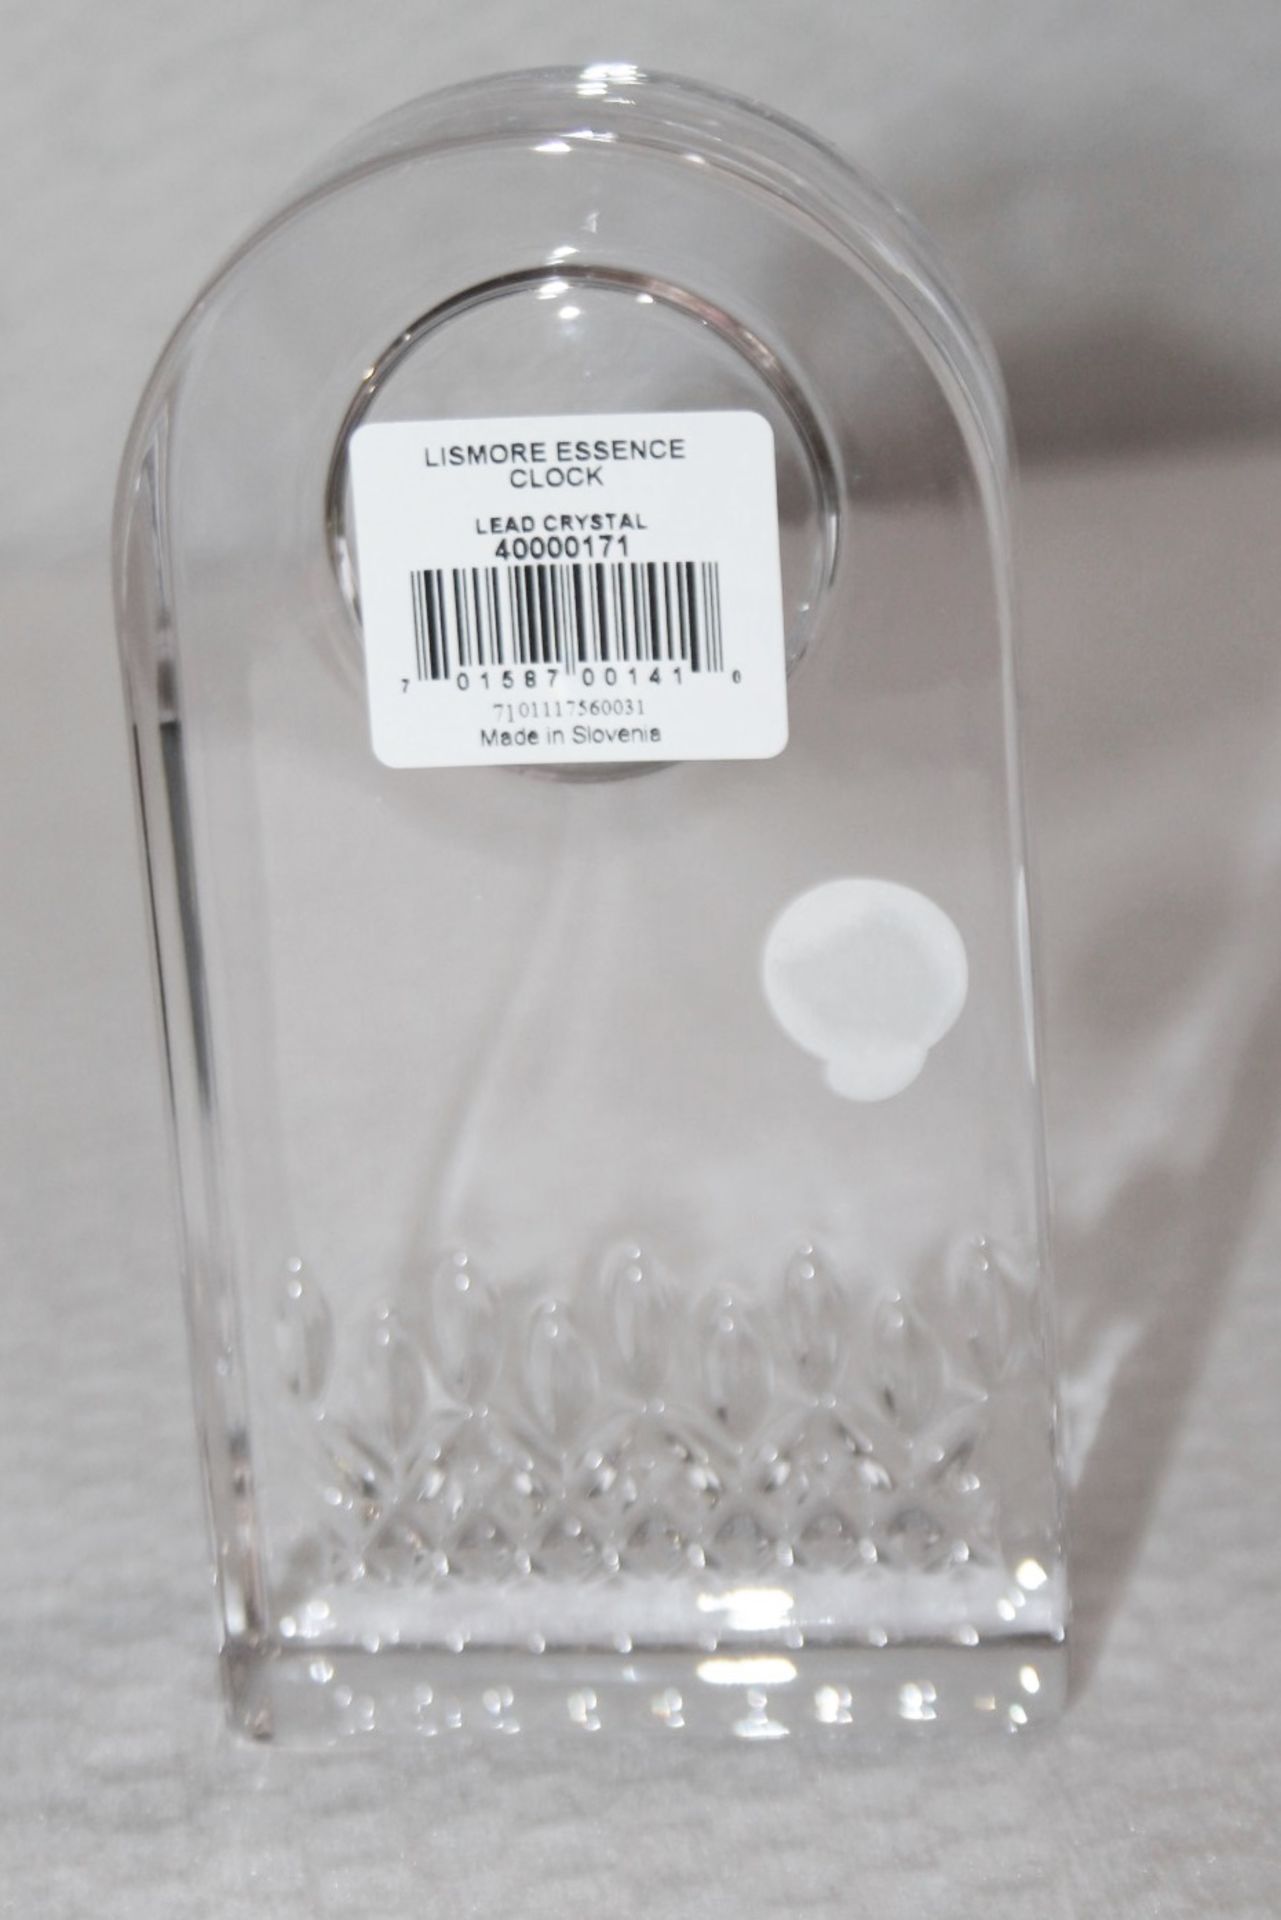 1 x WATERFORD 'Lismore' Essence Clock Mount (Crystal Section Only) - Original Price £155.00 - Unused - Image 3 of 12